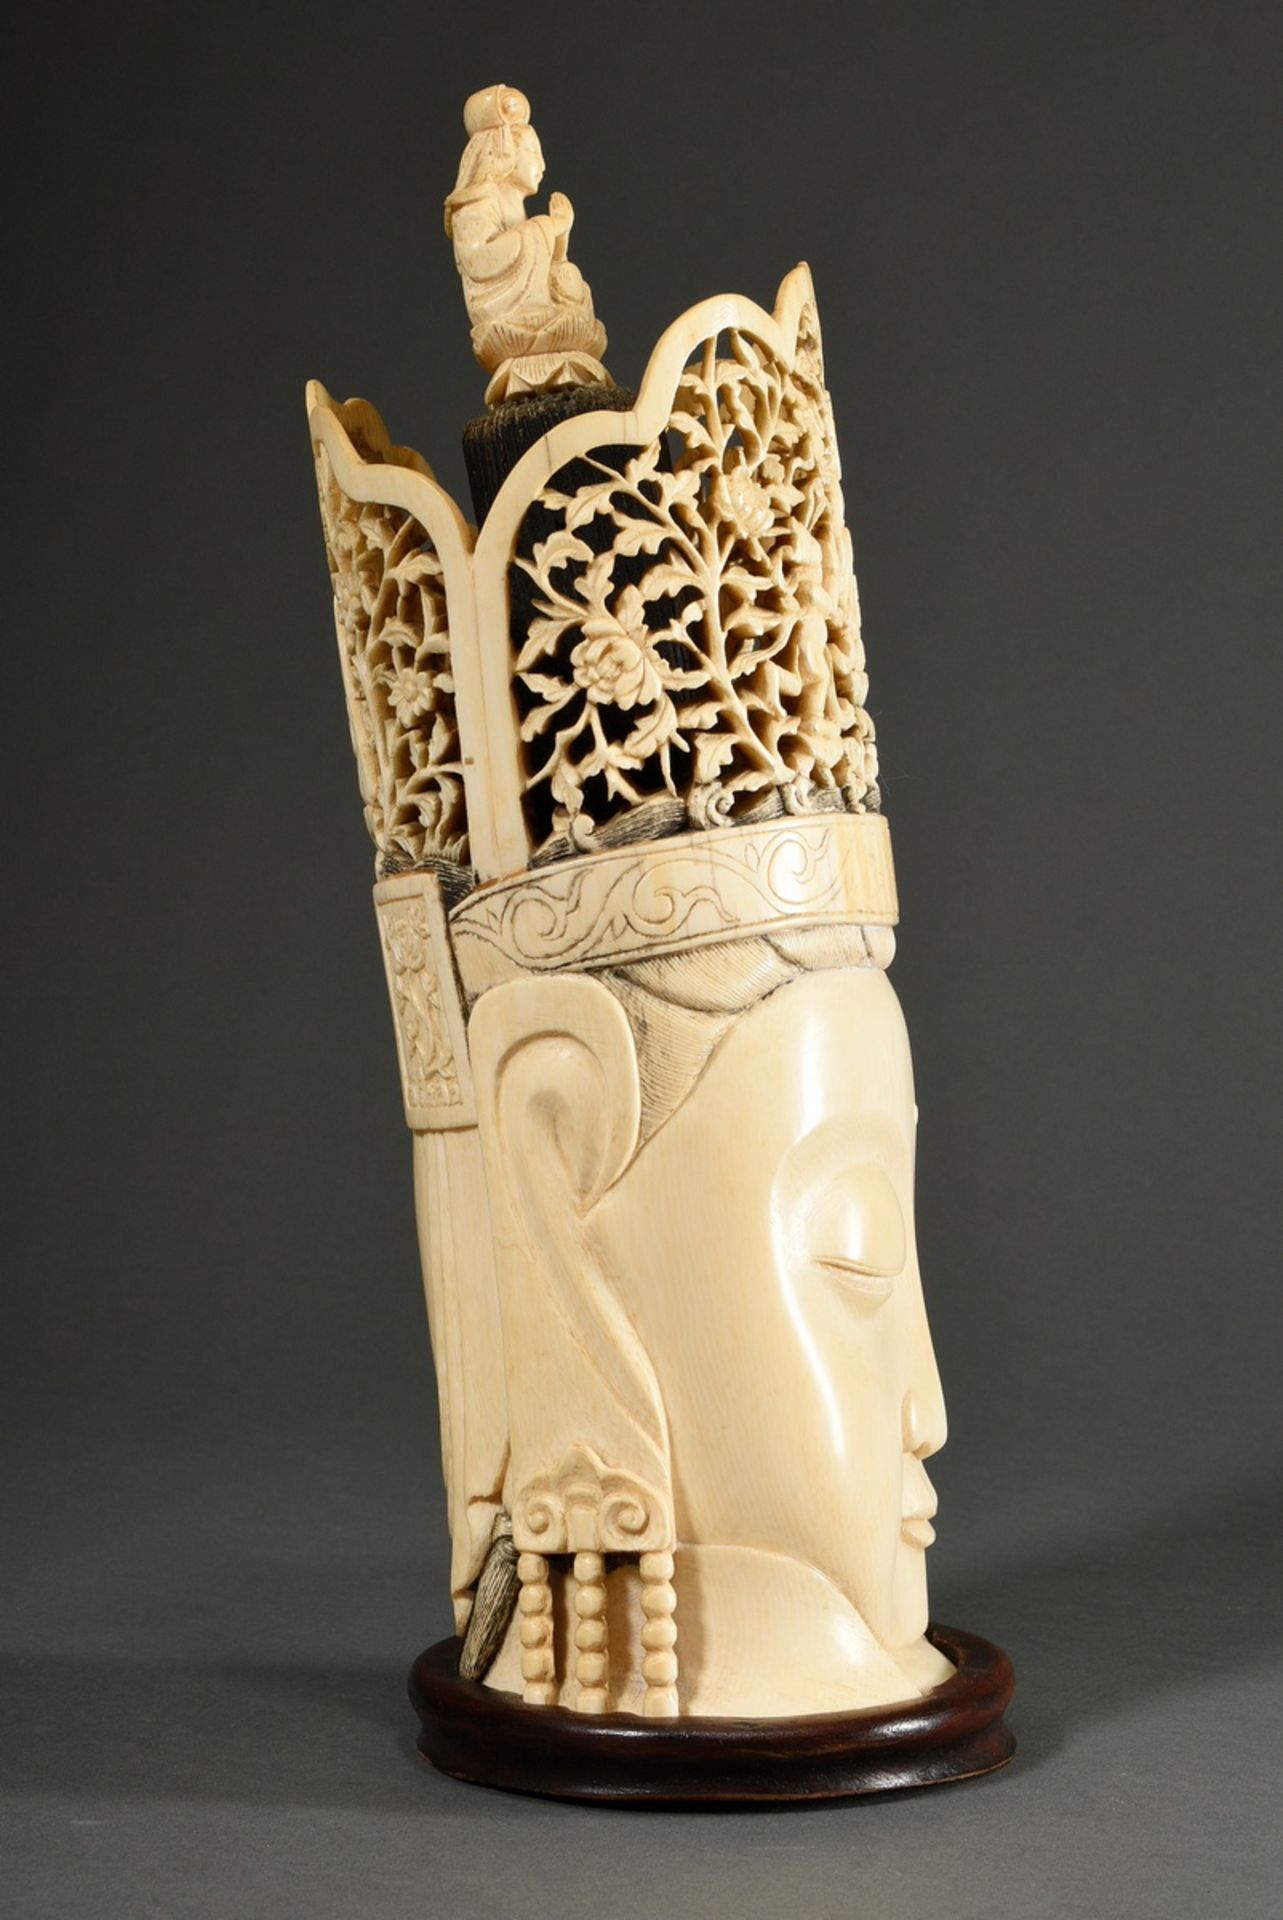 Large ivory carving ‘Head of Guanyin’ with openwork crown and depiction of Buddha with two adorants - Image 5 of 11